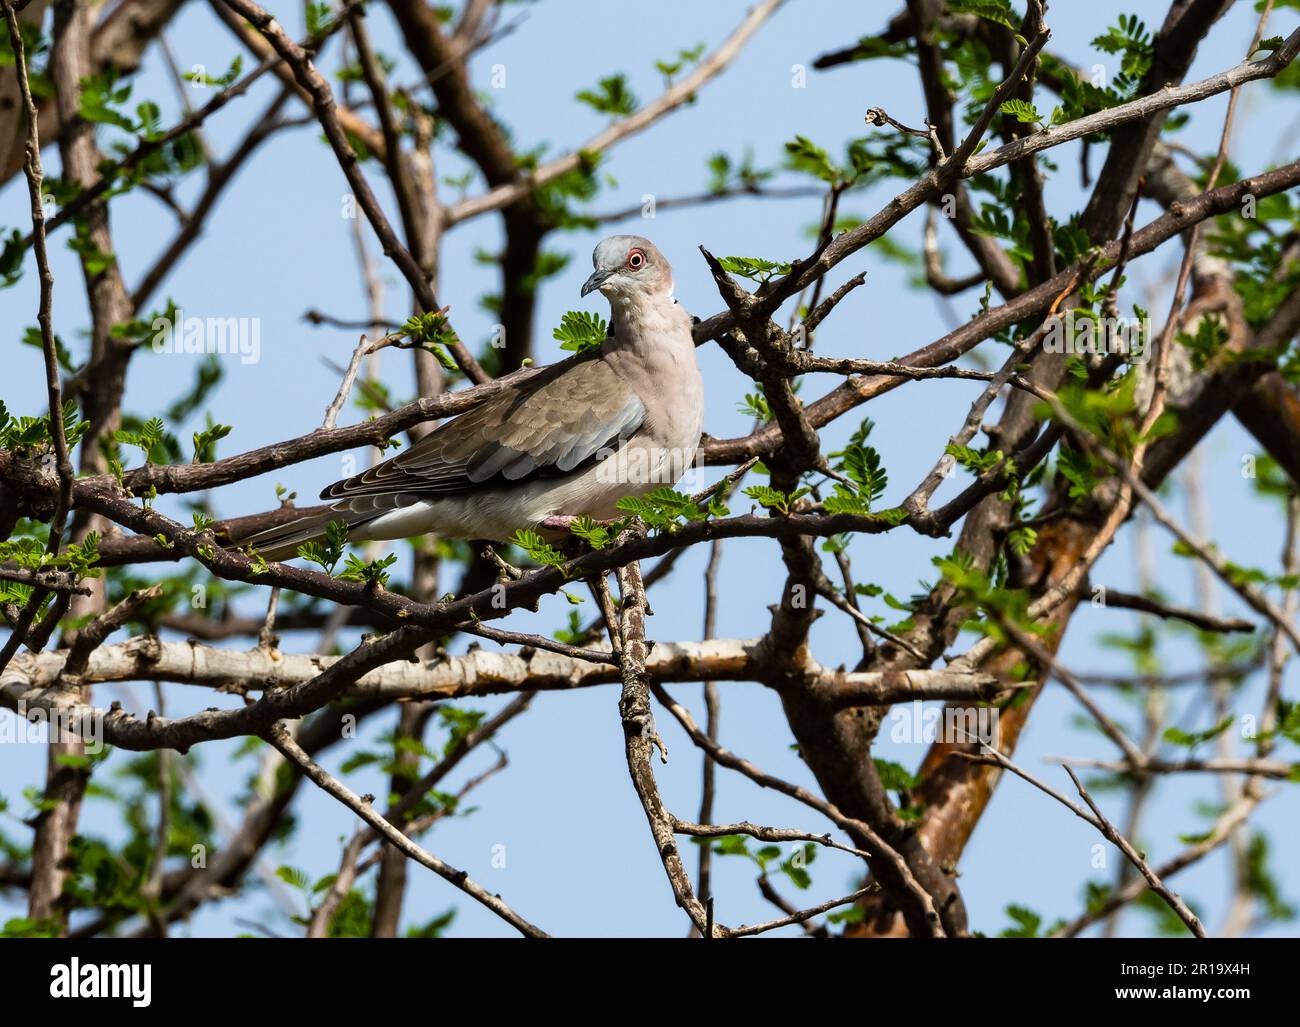 A Mourning Collared-Dove (Streptopelia decipiens) perched on a branch. Kenya, Africa. Stock Photo